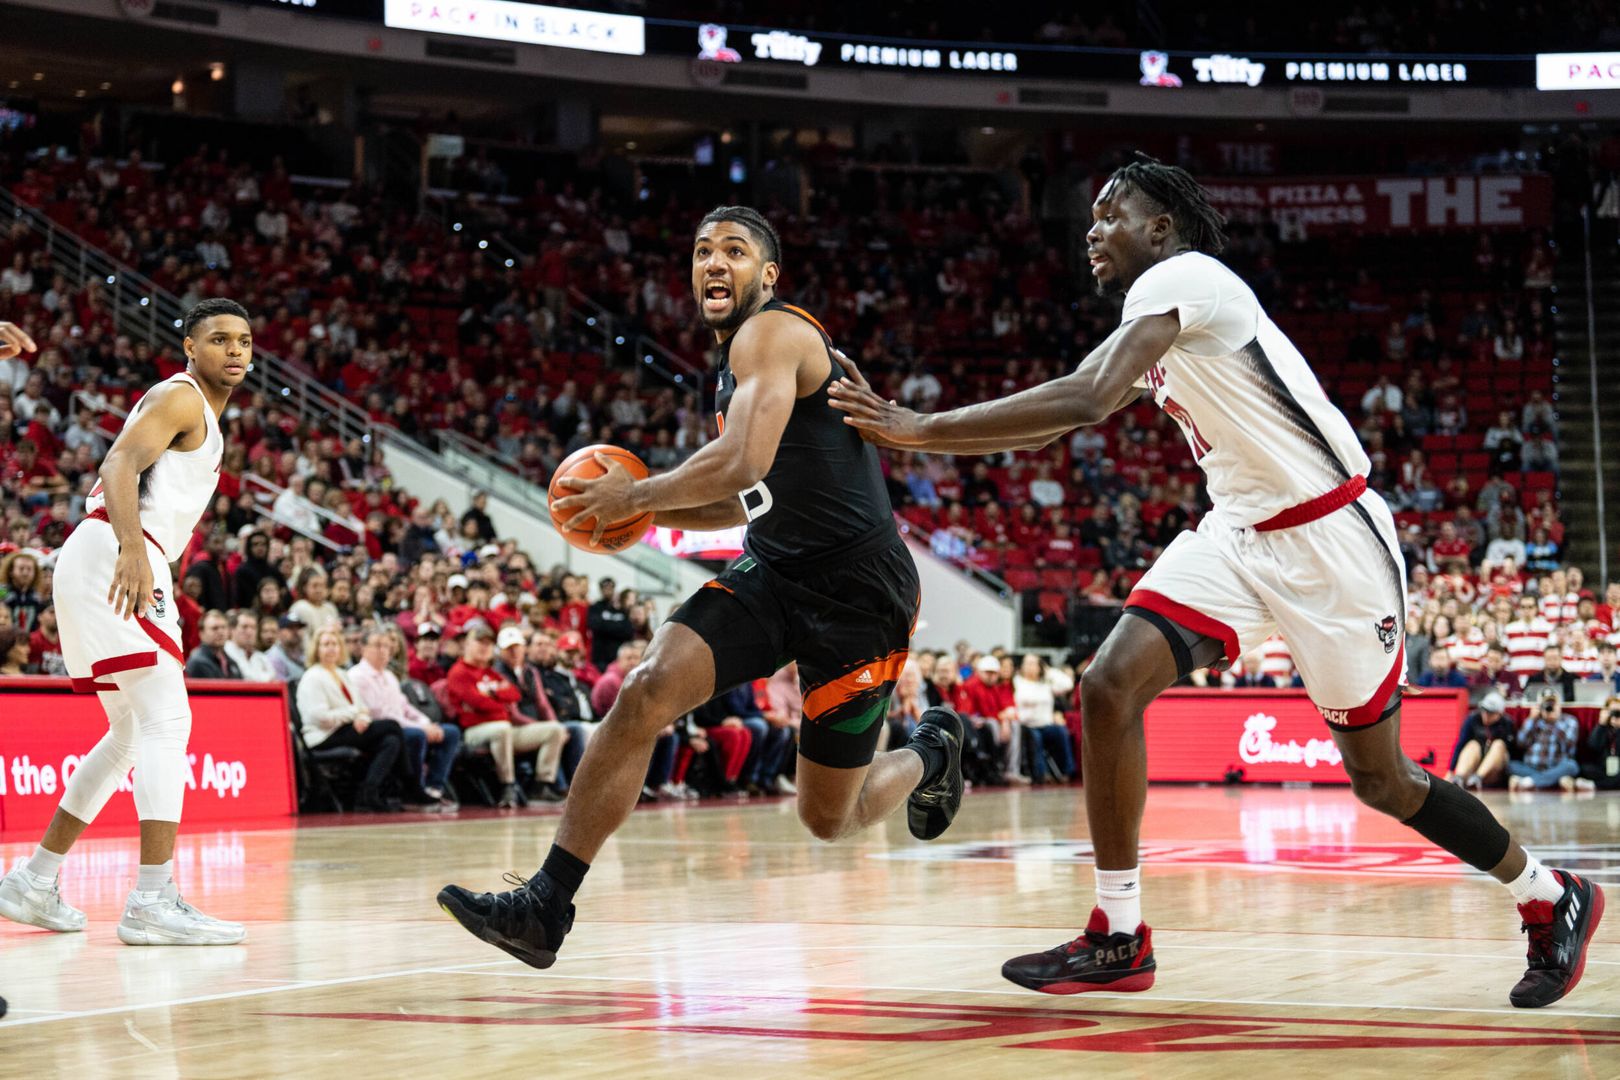 MBB Falls, 83-81, in Overtime at NC State